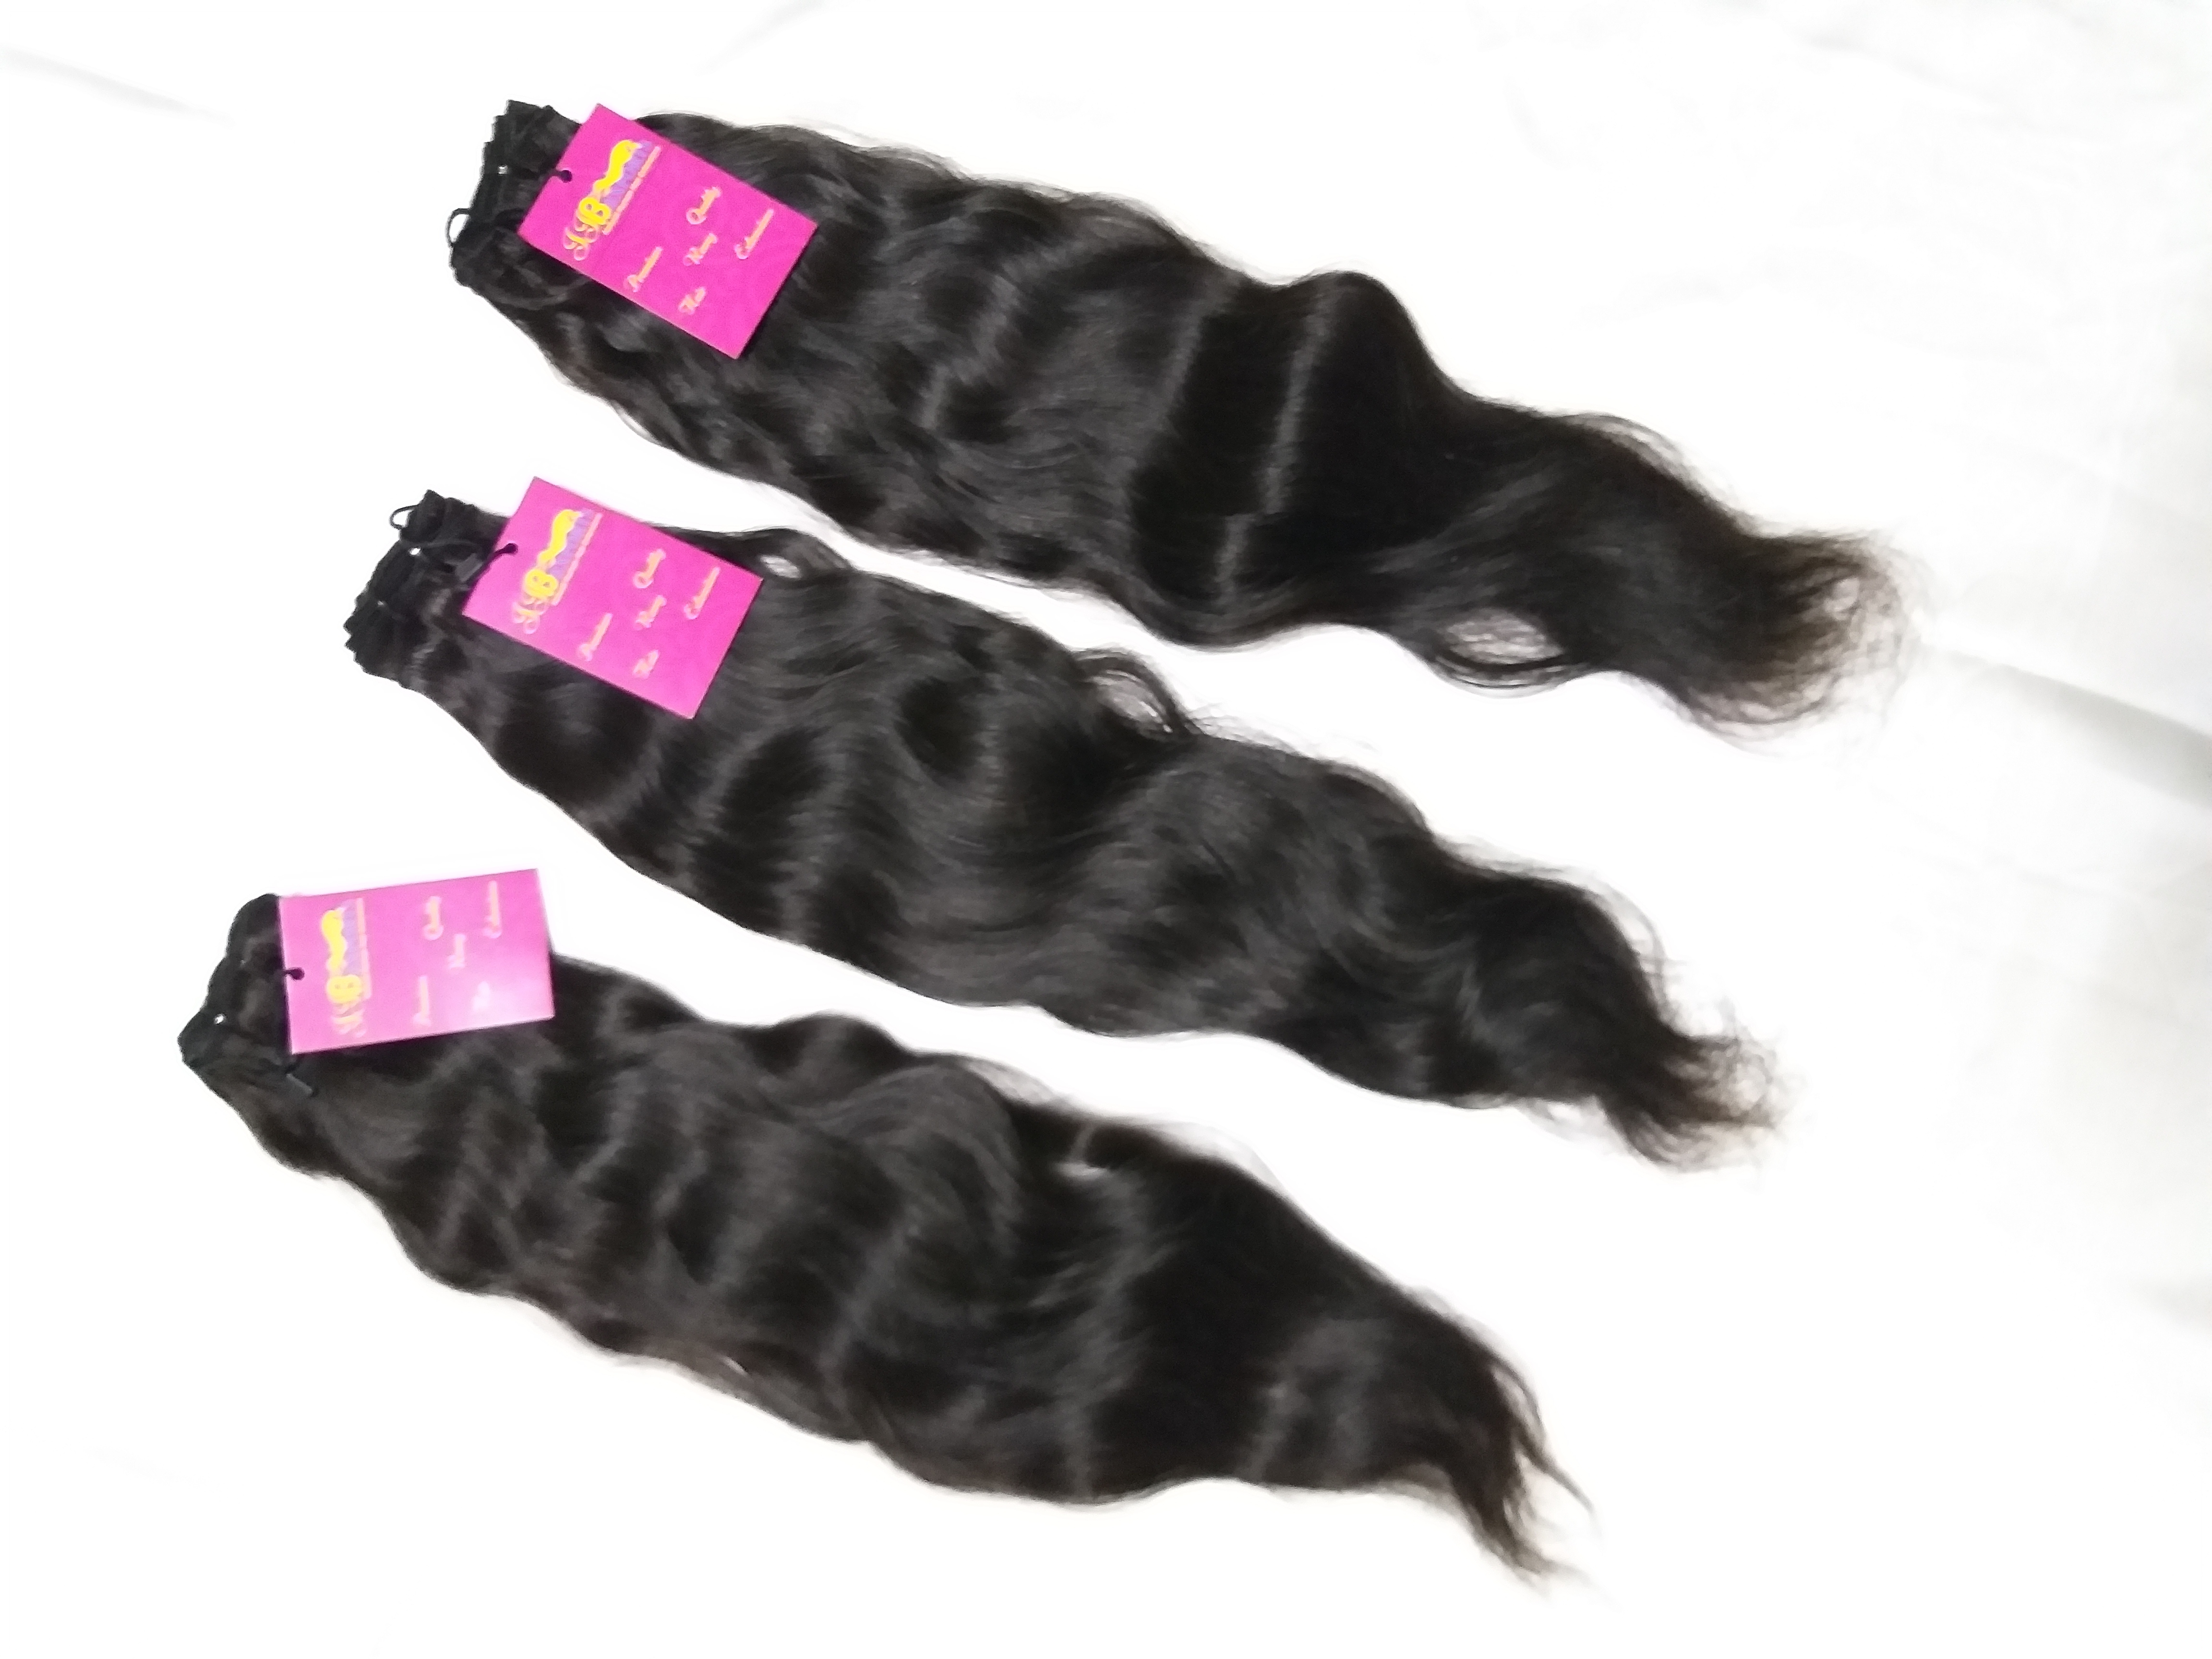 Natural Raw Unprocessed Mink Wavy/straight/curly Virgin Remy Human Hair Bundle